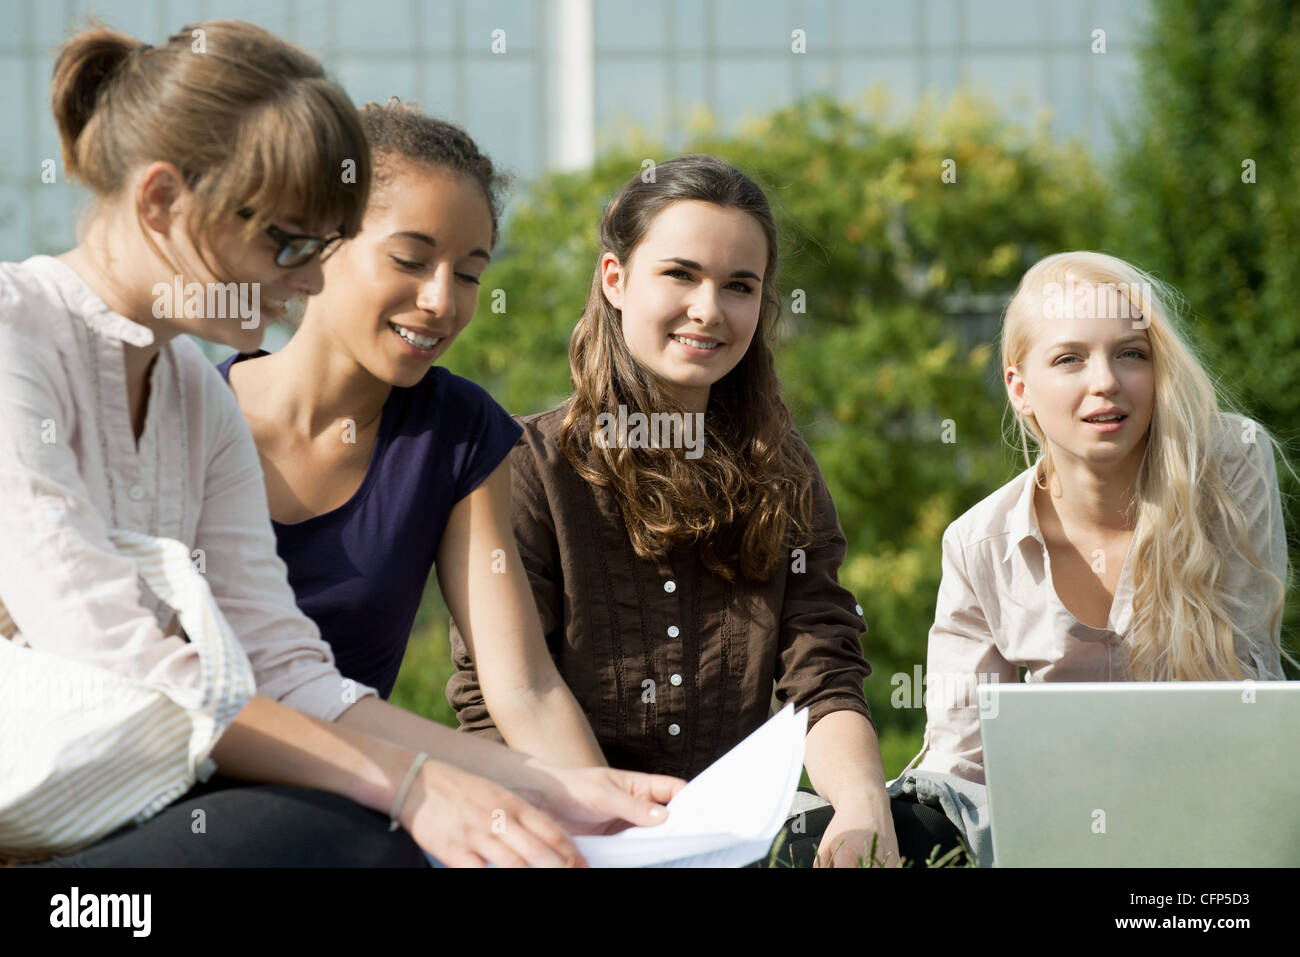 Female university students studying together outdoors, focus on two women Stock Photo